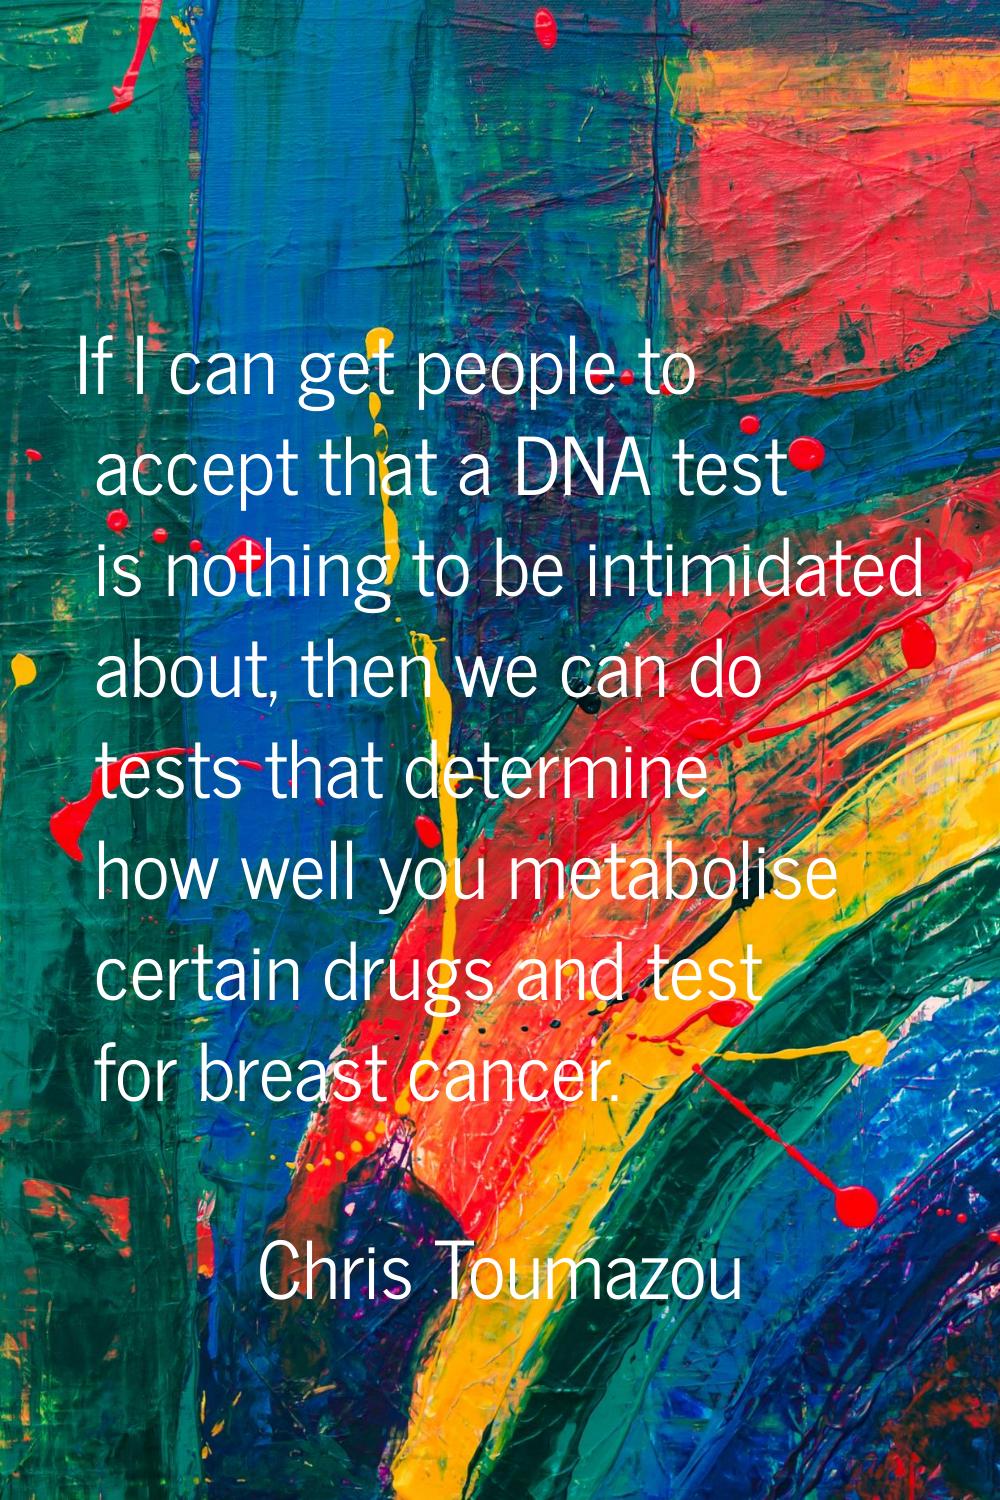 If I can get people to accept that a DNA test is nothing to be intimidated about, then we can do te